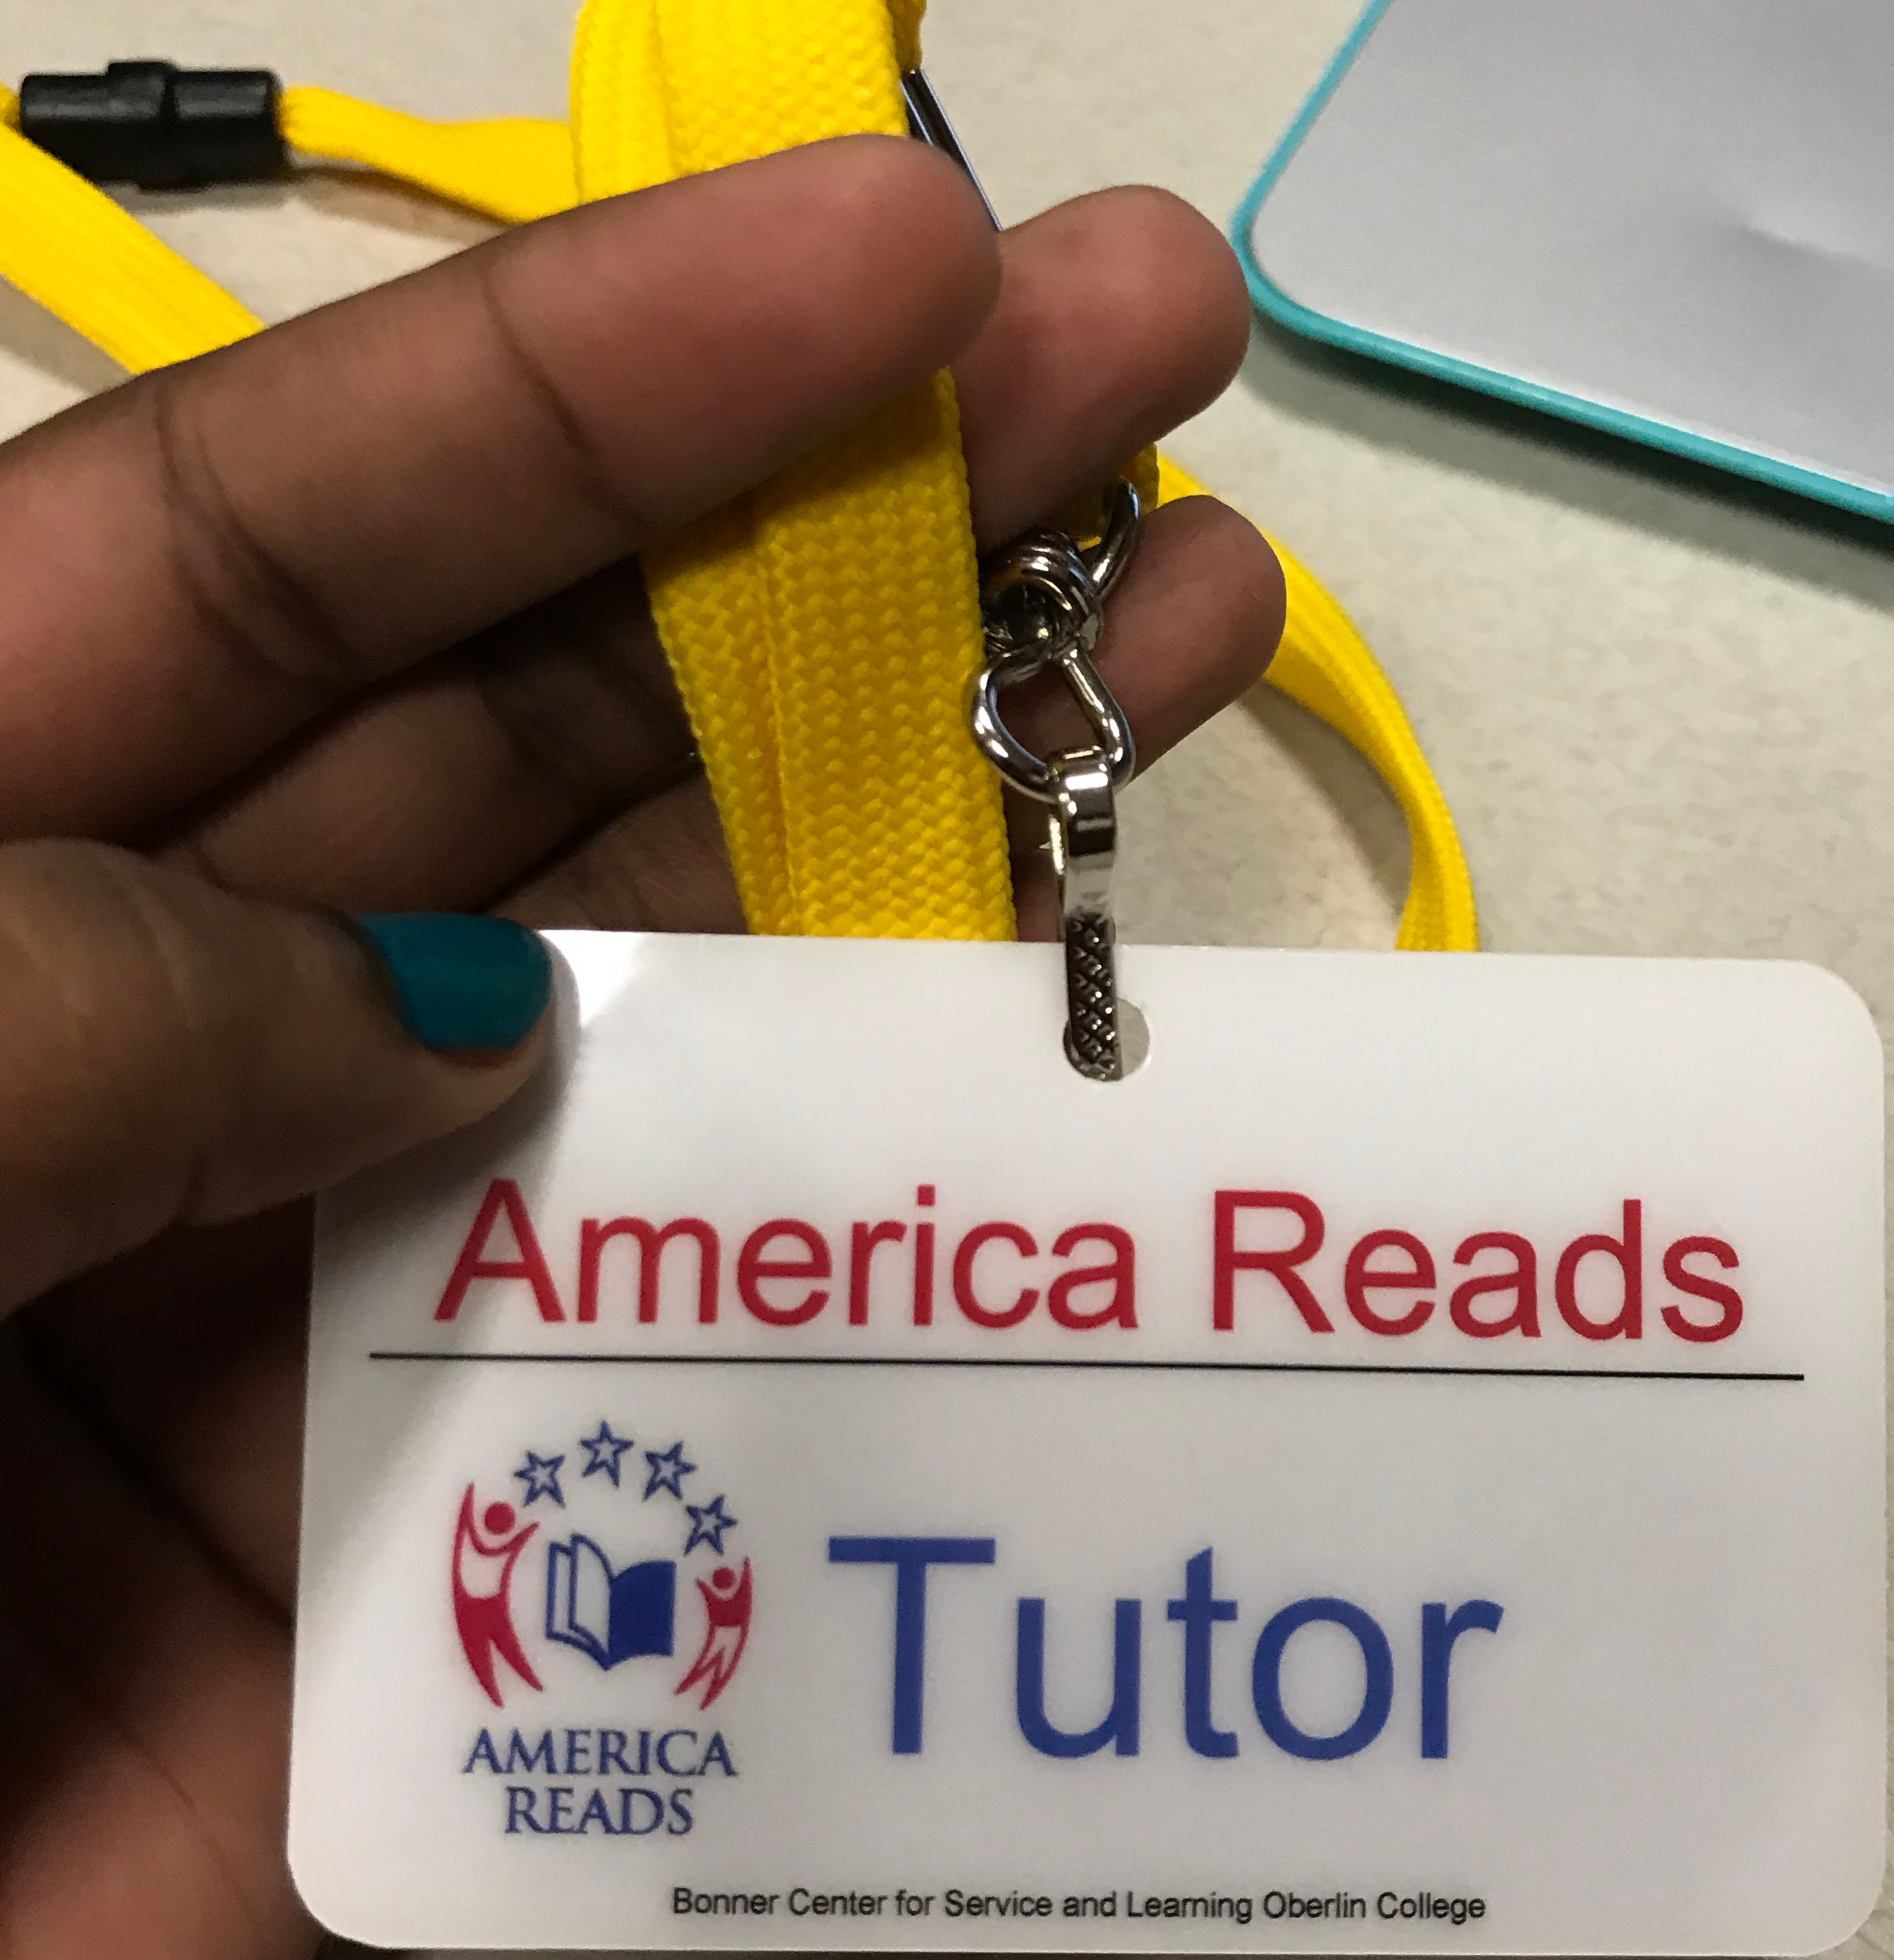 America Reads name tag